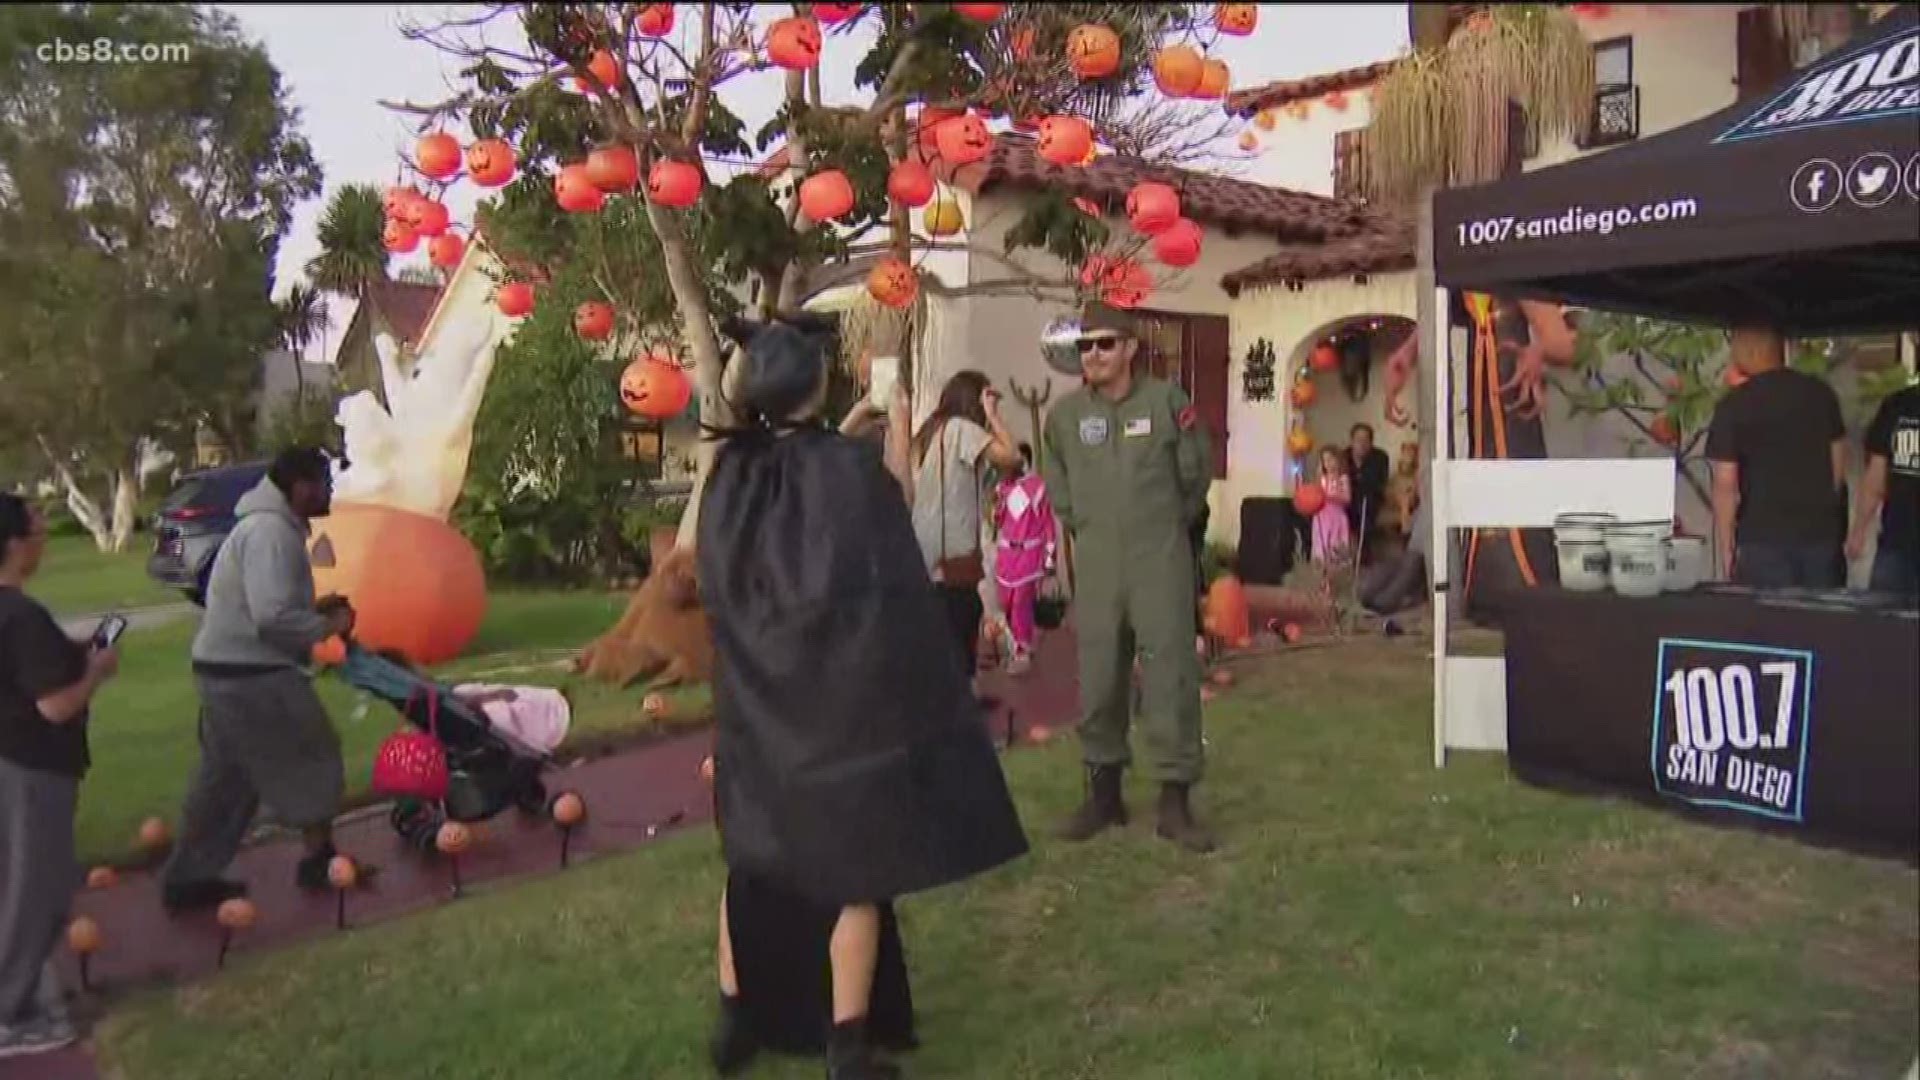 In one San Diego community, the whole neighborhood joined in on the Halloween fun.